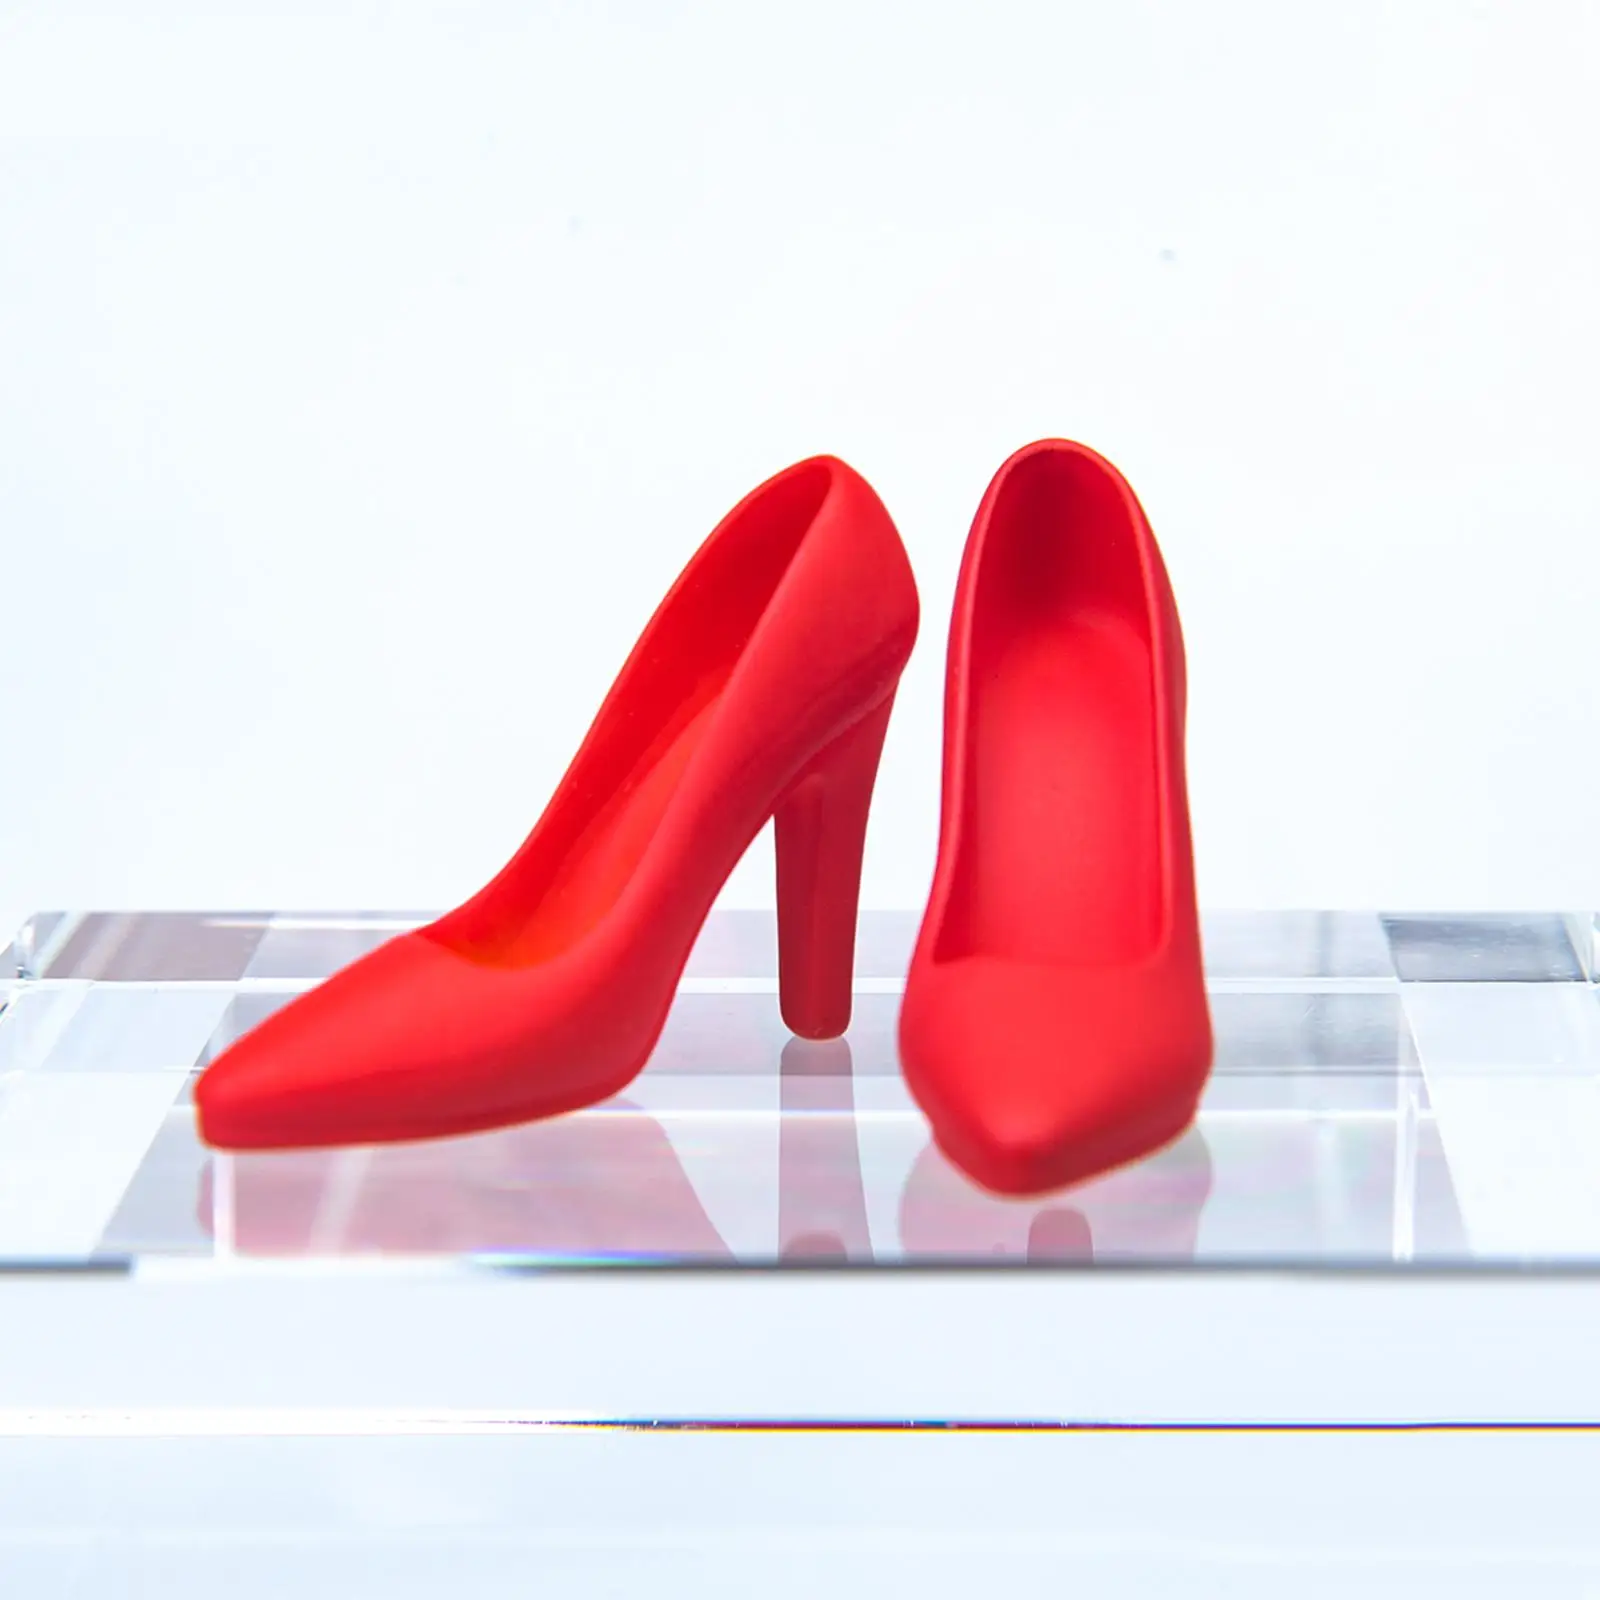 1:6 Scale, High Heel Shoes , Female High Heel Shoes, Stiletto Pump, for 12inch Action Figures Figure Accessory